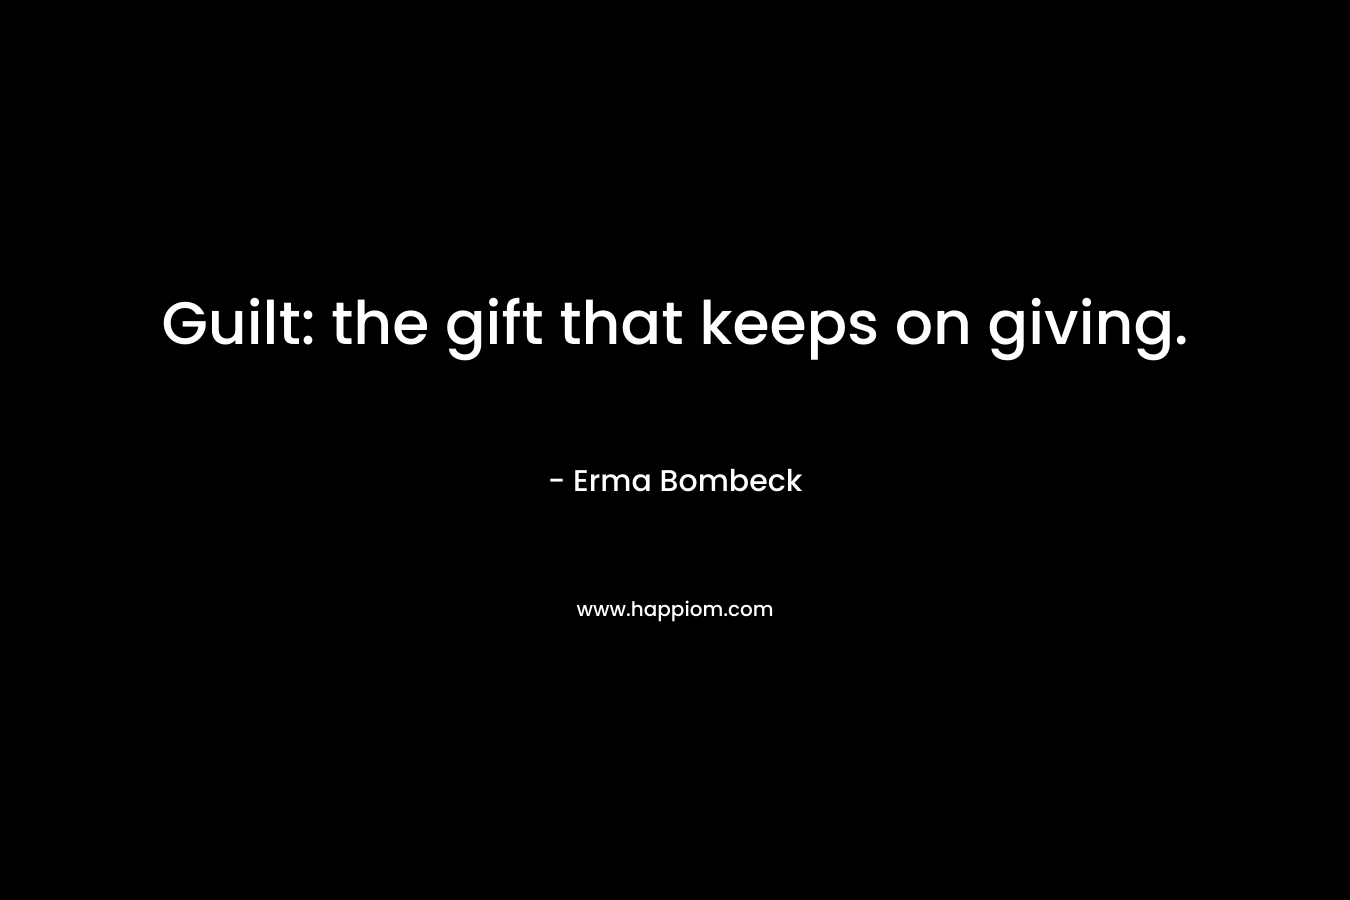 Guilt: the gift that keeps on giving. – Erma Bombeck